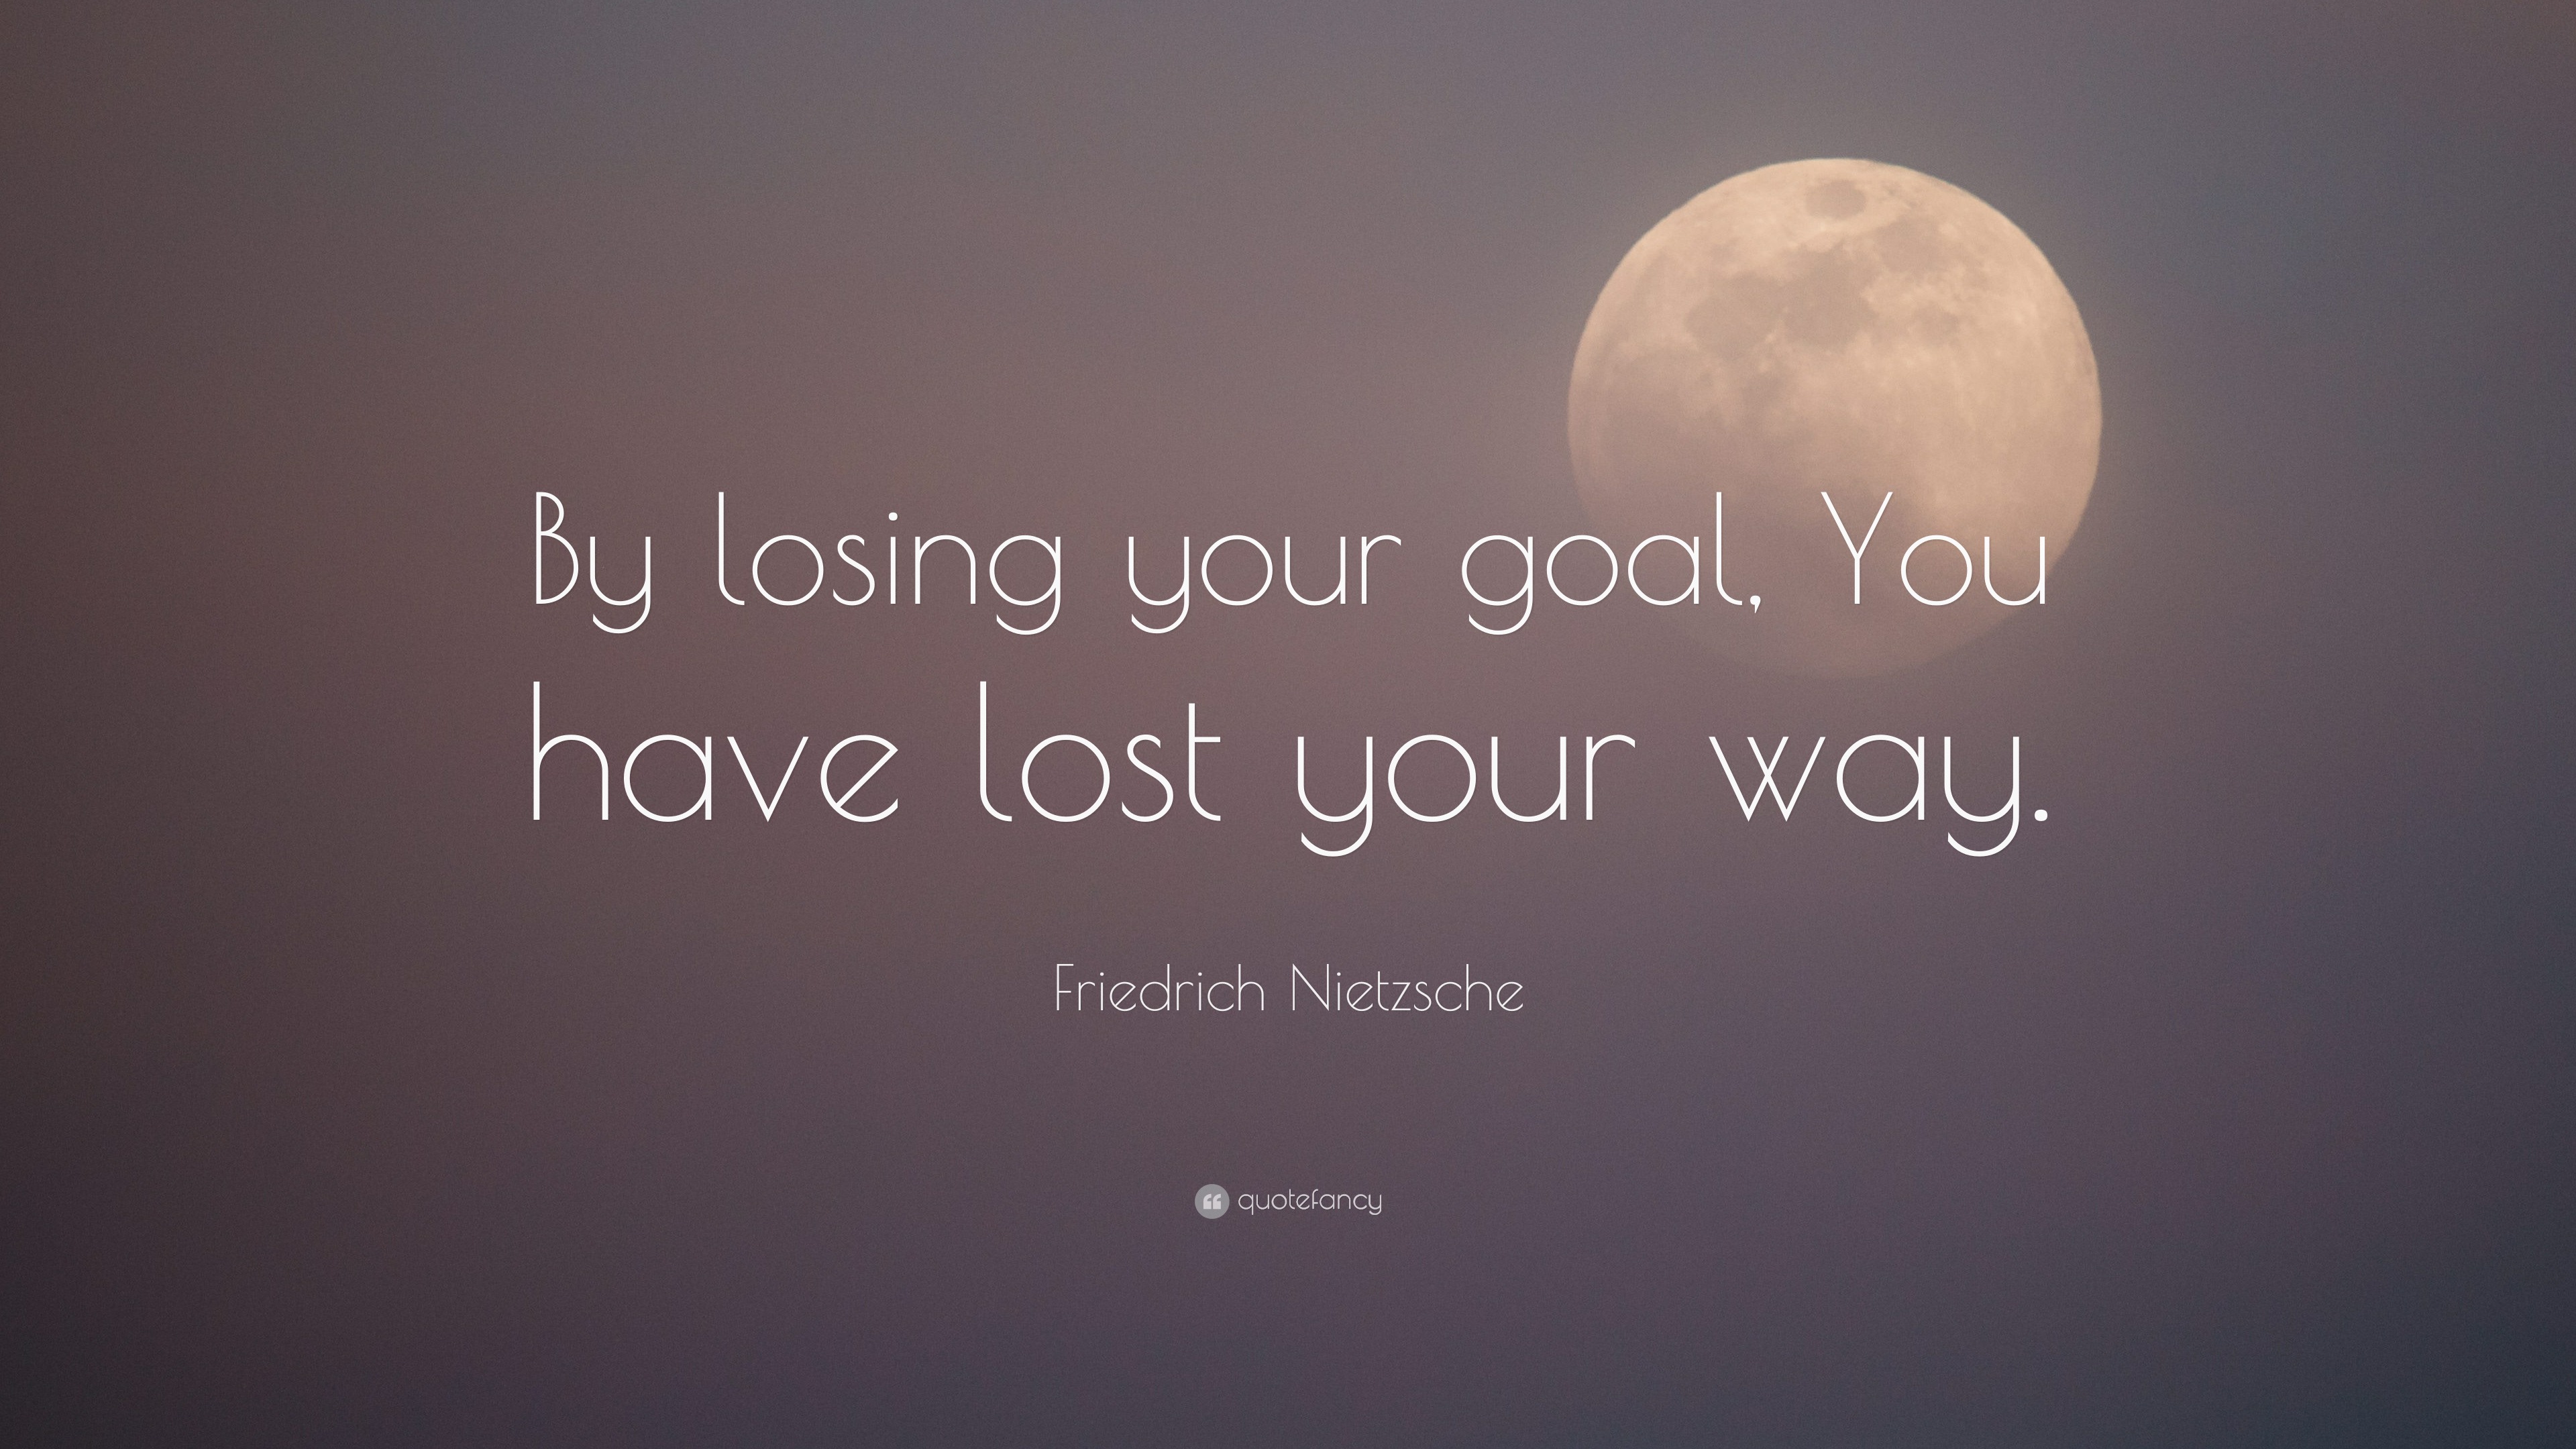 Friedrich Nietzsche Quote “by Losing Your Goal You Have Lost Your Way”